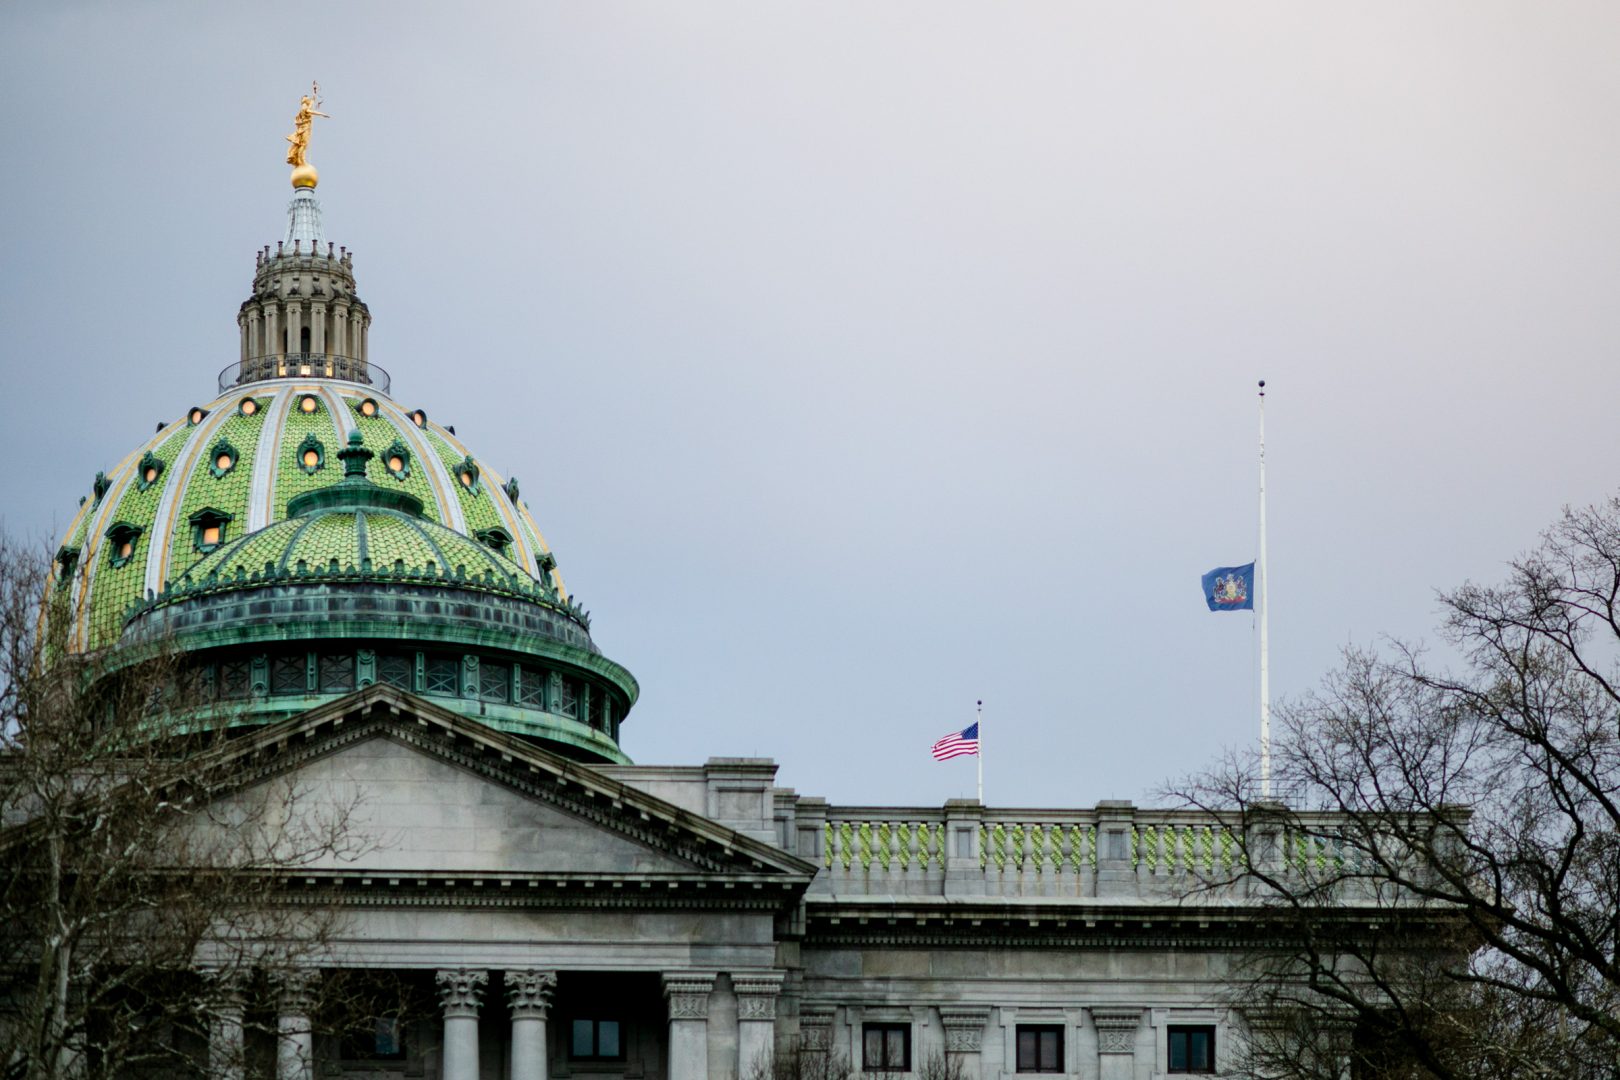 The American and Pennsylvania flags over the capitol building in Harrisburg on April 7, 2020. Gov. Tom Wolf ordered the state flag to fly at half staff to honor victims of the coronavirus outbreak.